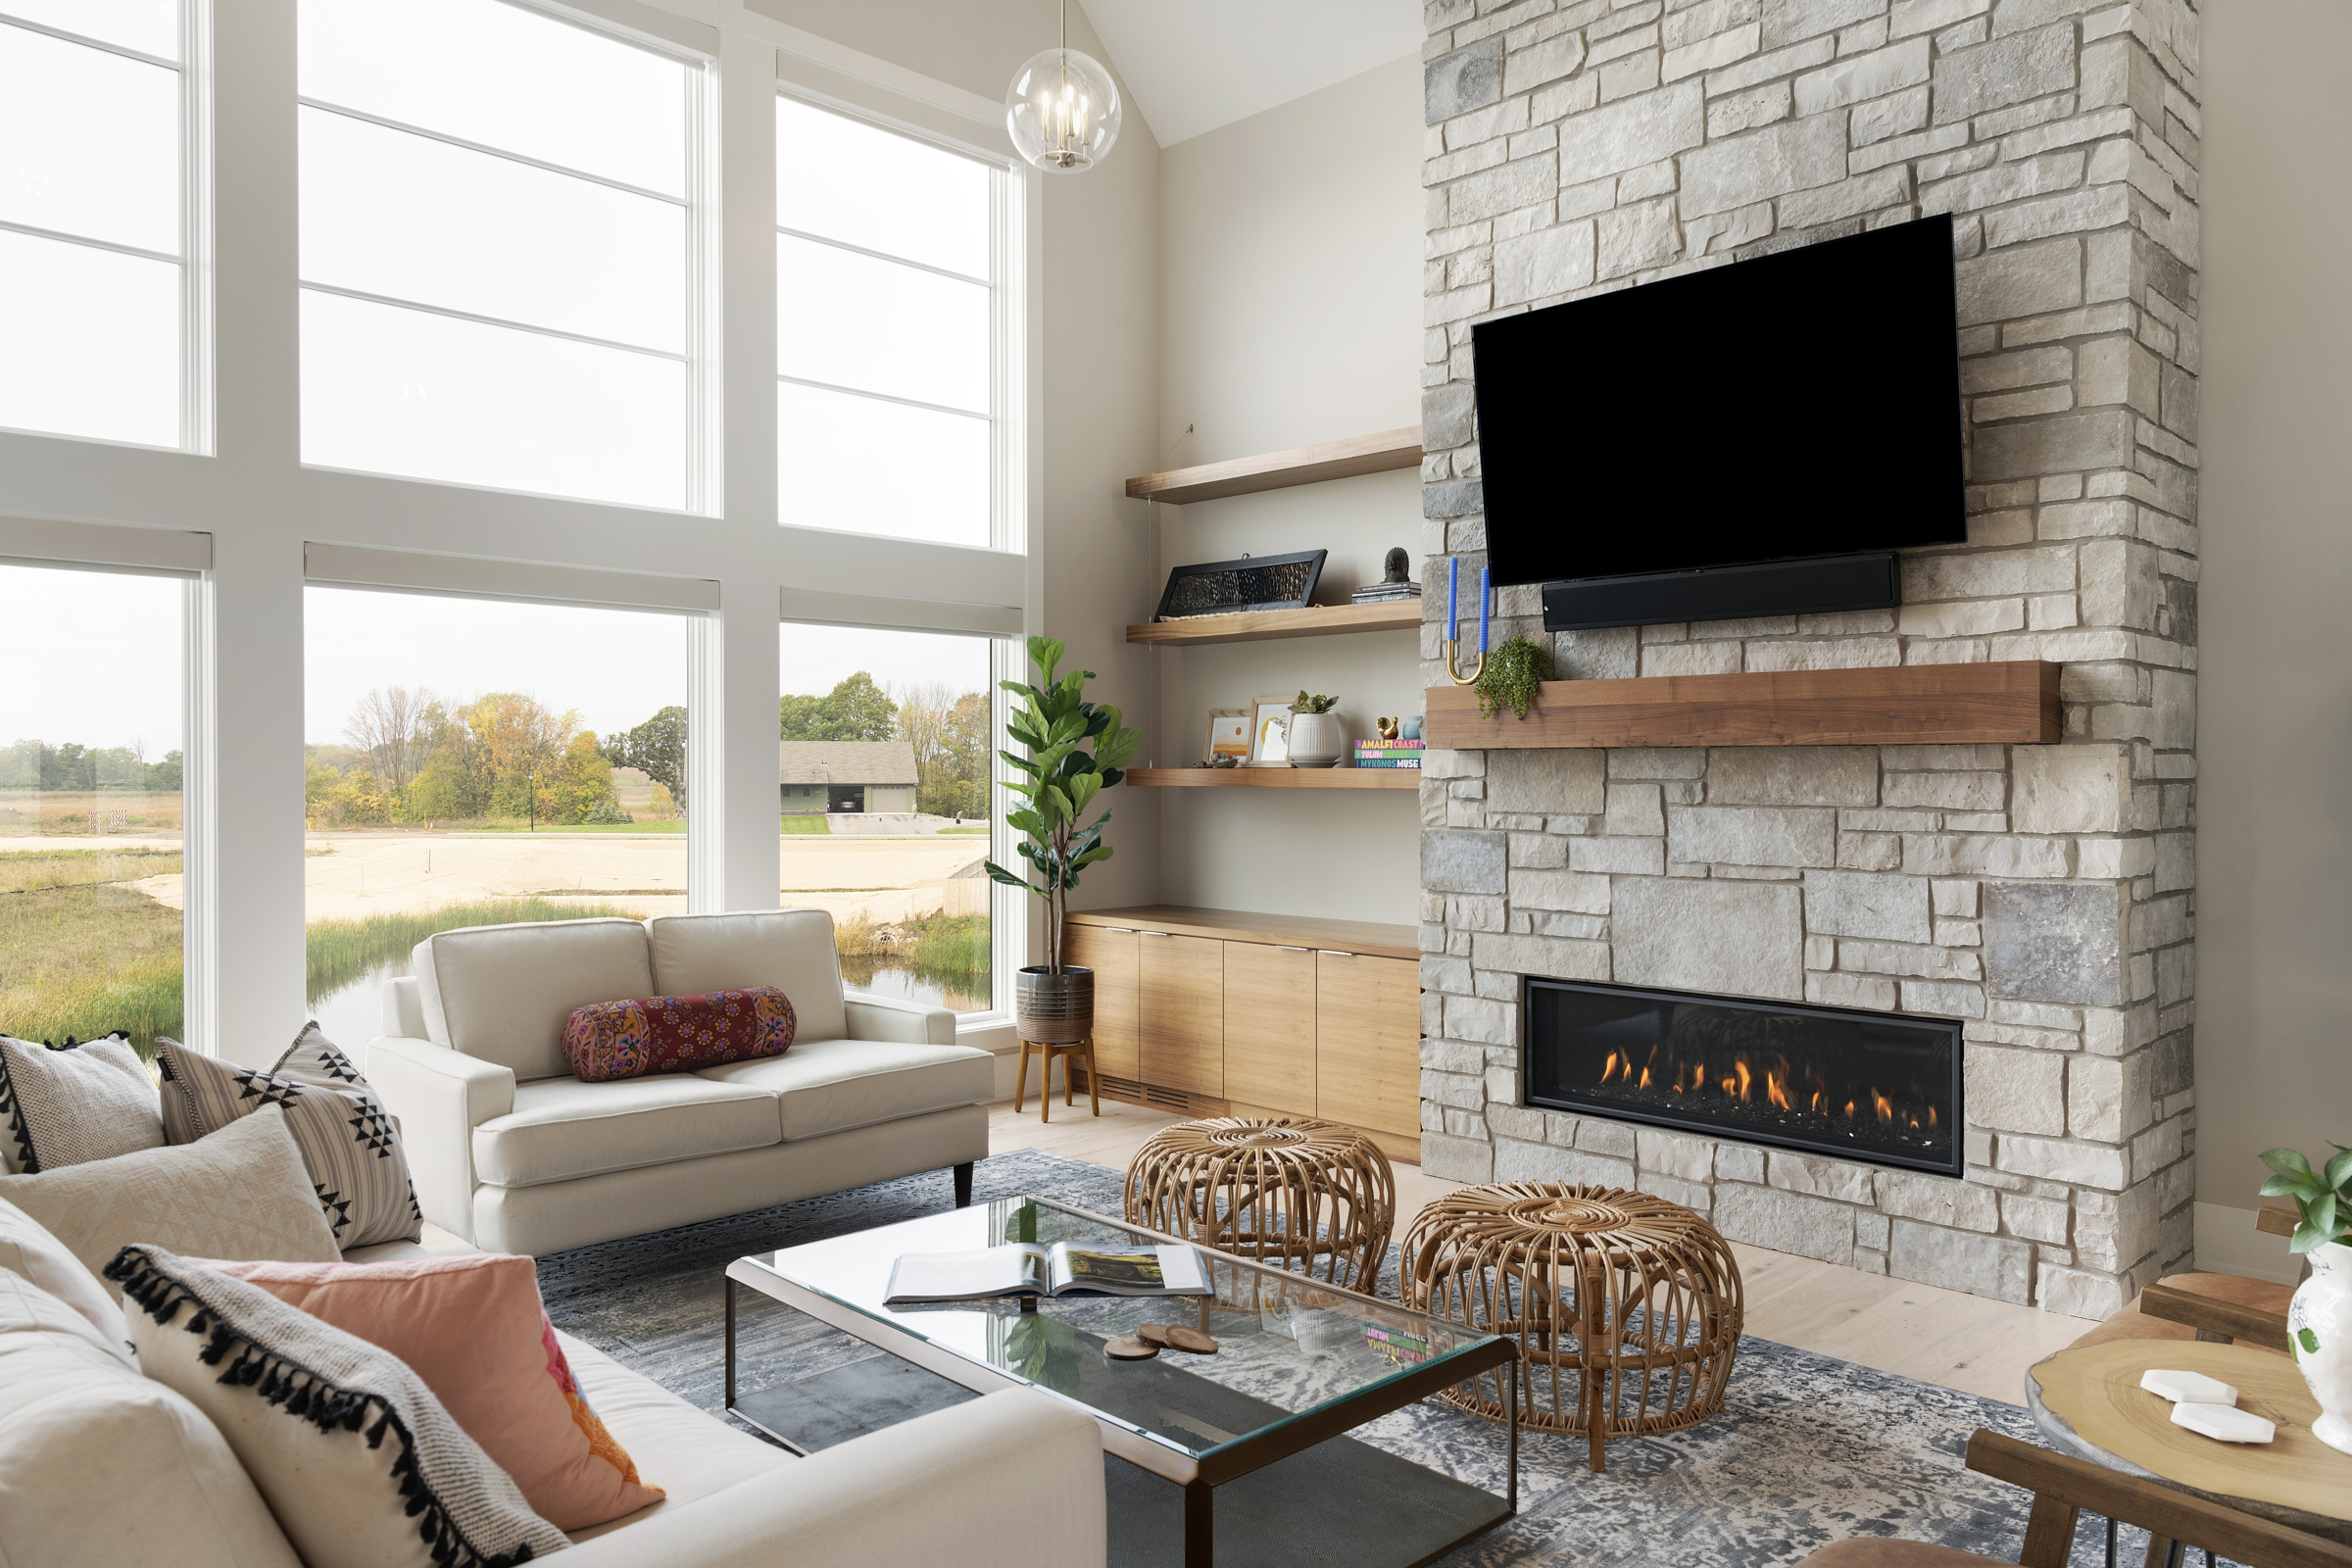 A prairie transitional living room with a stone fireplace and large windows.